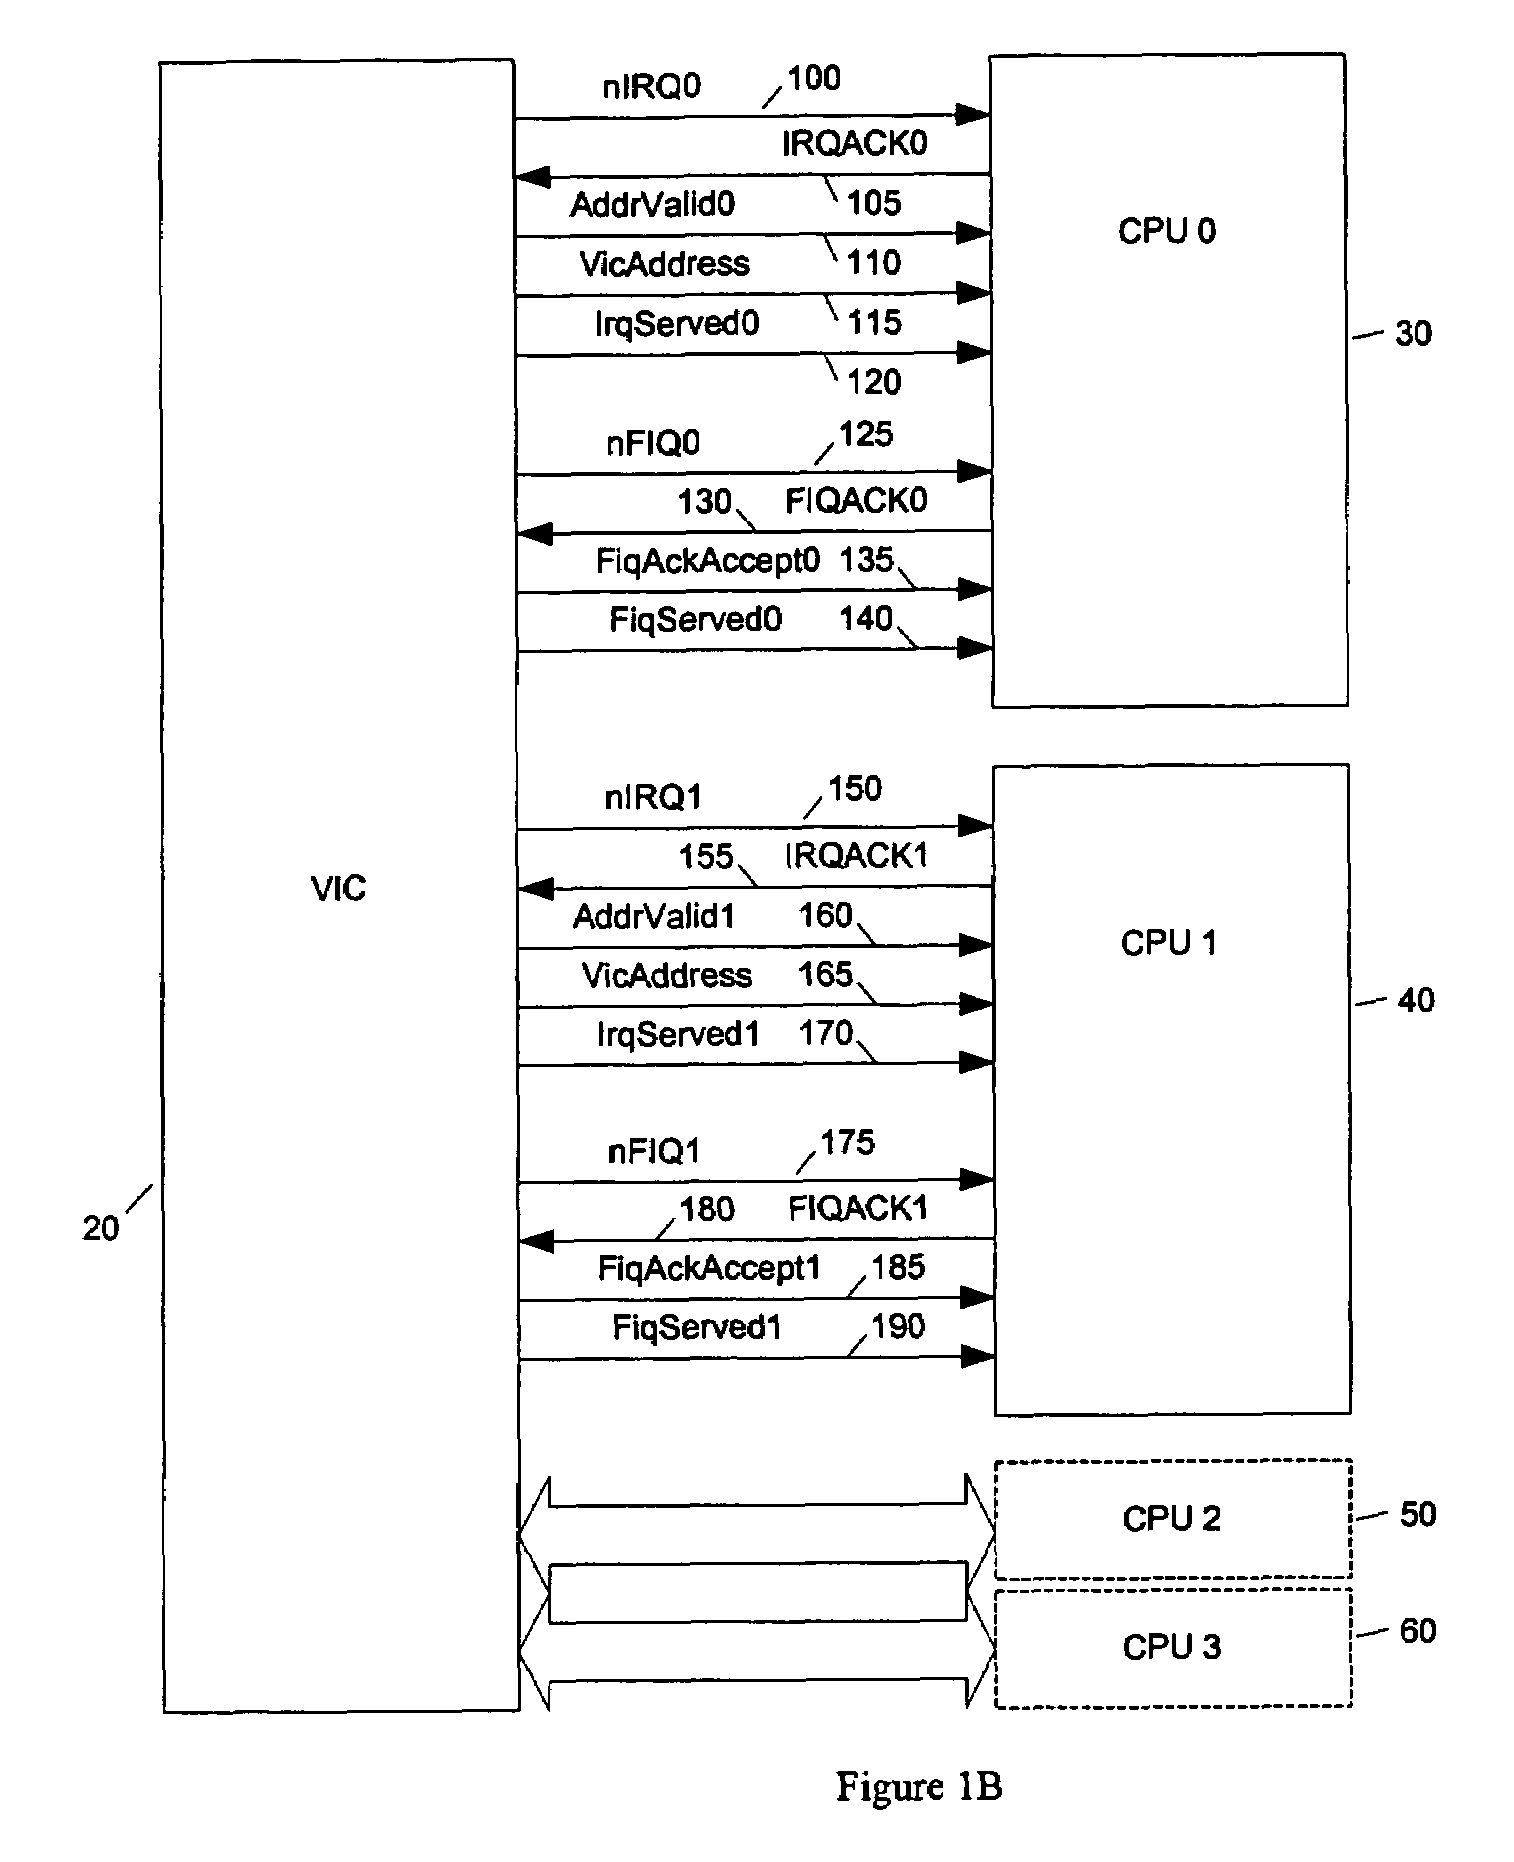 Handling interrupts in a system having multiple data processing units